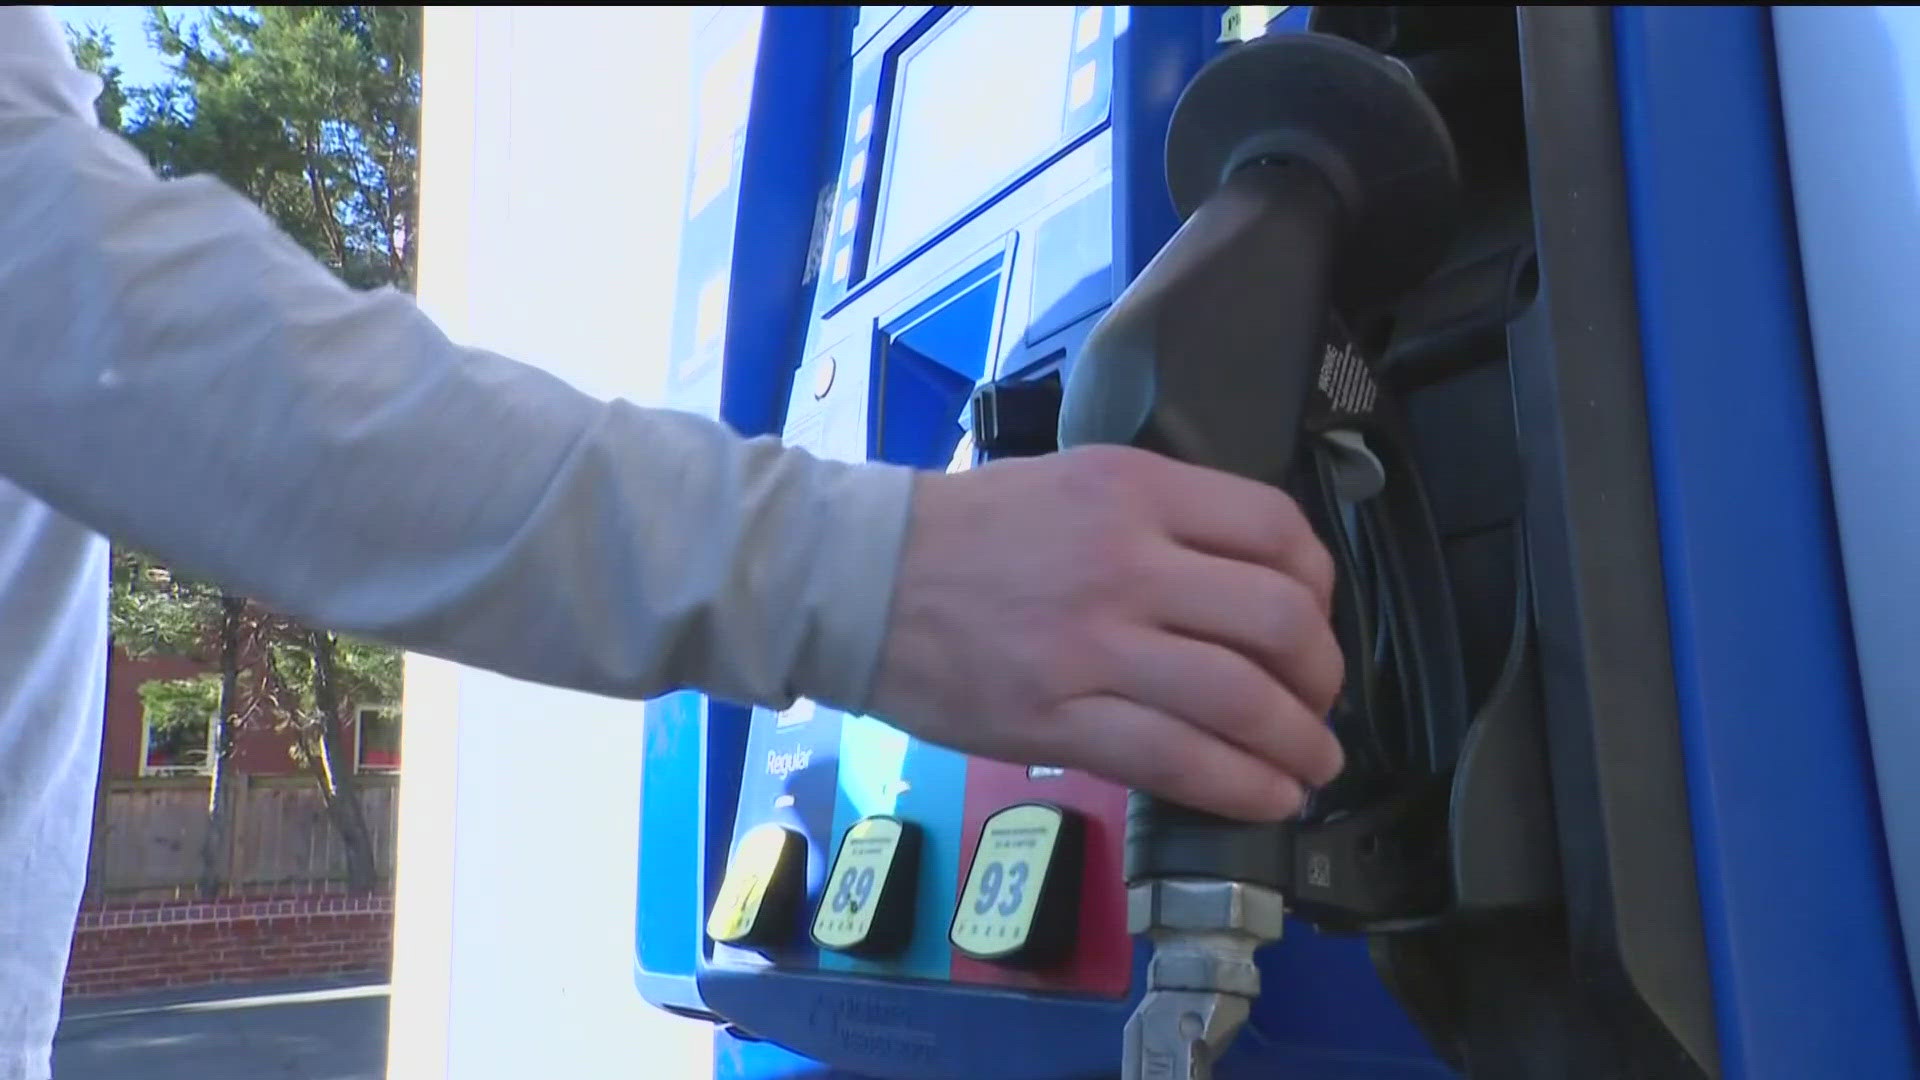 Metro Atlanta is averaging about $3.46 per gallon of unleaded gasoline. That’s about 13 cents higher than a month ago, and 25 cents higher than a year ago.